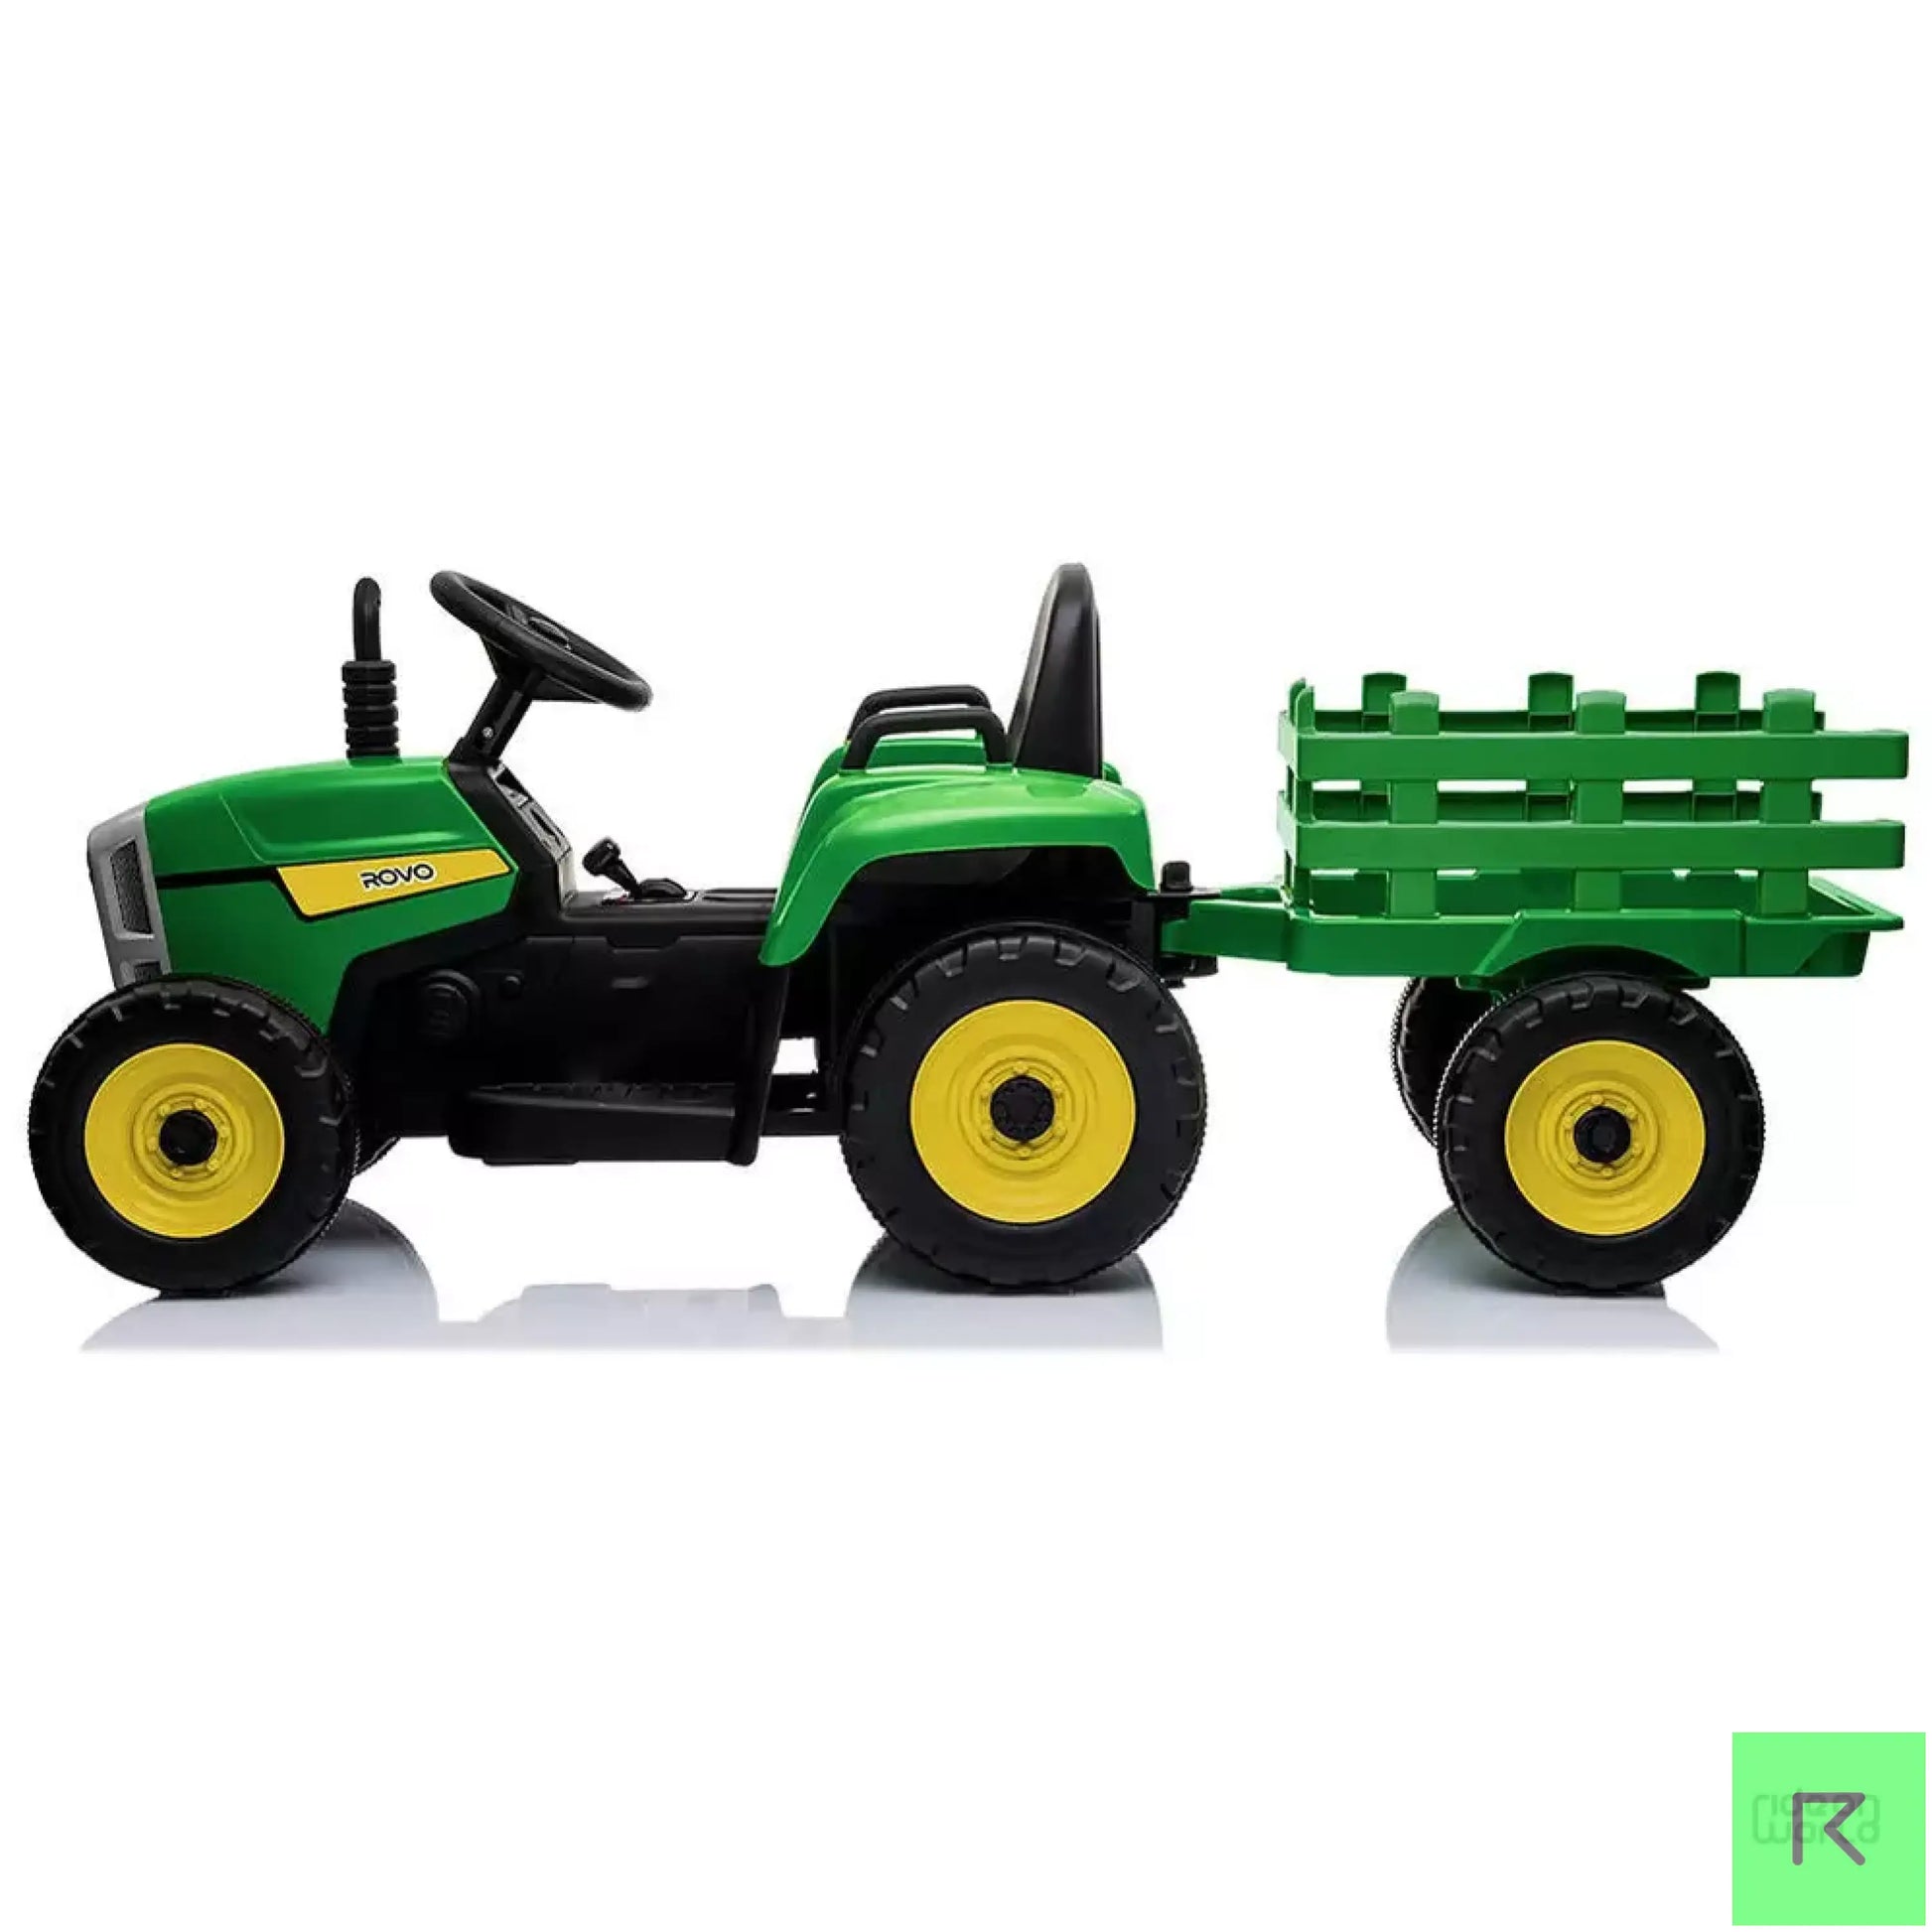 ROW KIDS Electric Battery Operated Ride On Tractor Toy, Remote Control, Green and Yellow